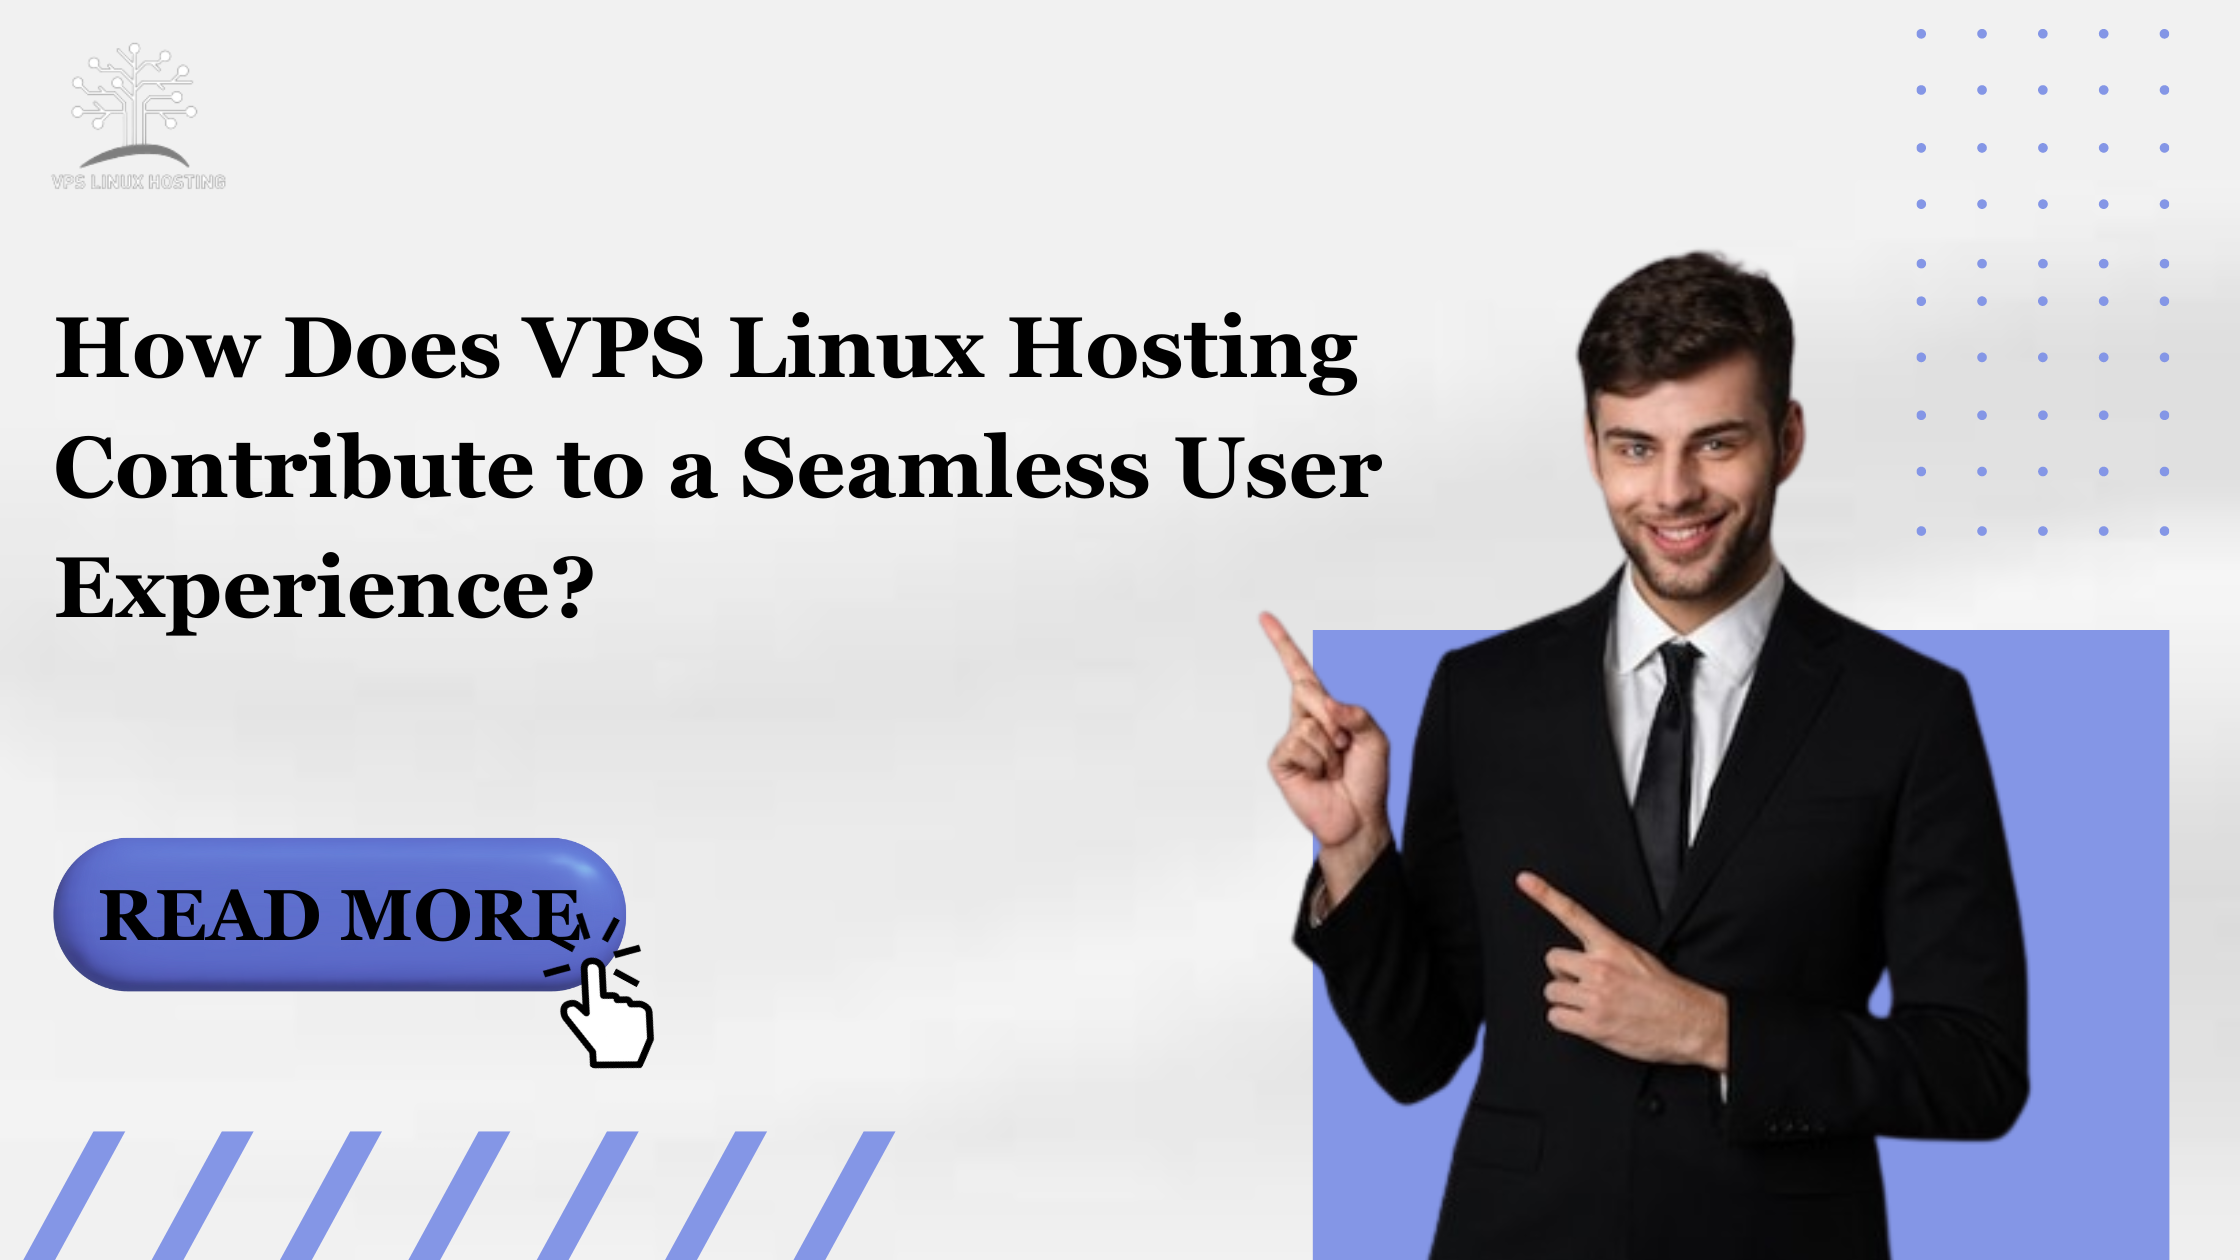 How Does VPS Linux Hosting Contribute to a Seamless User Experience